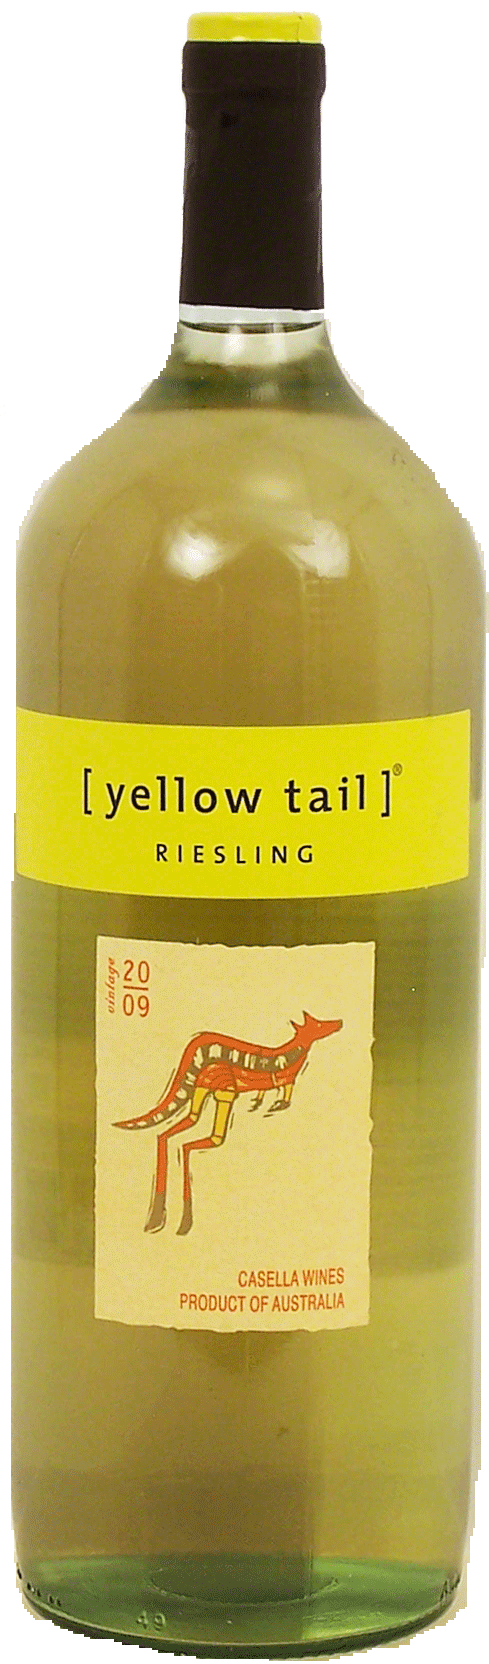 Yellow Tail  riesling wine of Australia, 12.5% alc. by vol. Full-Size Picture